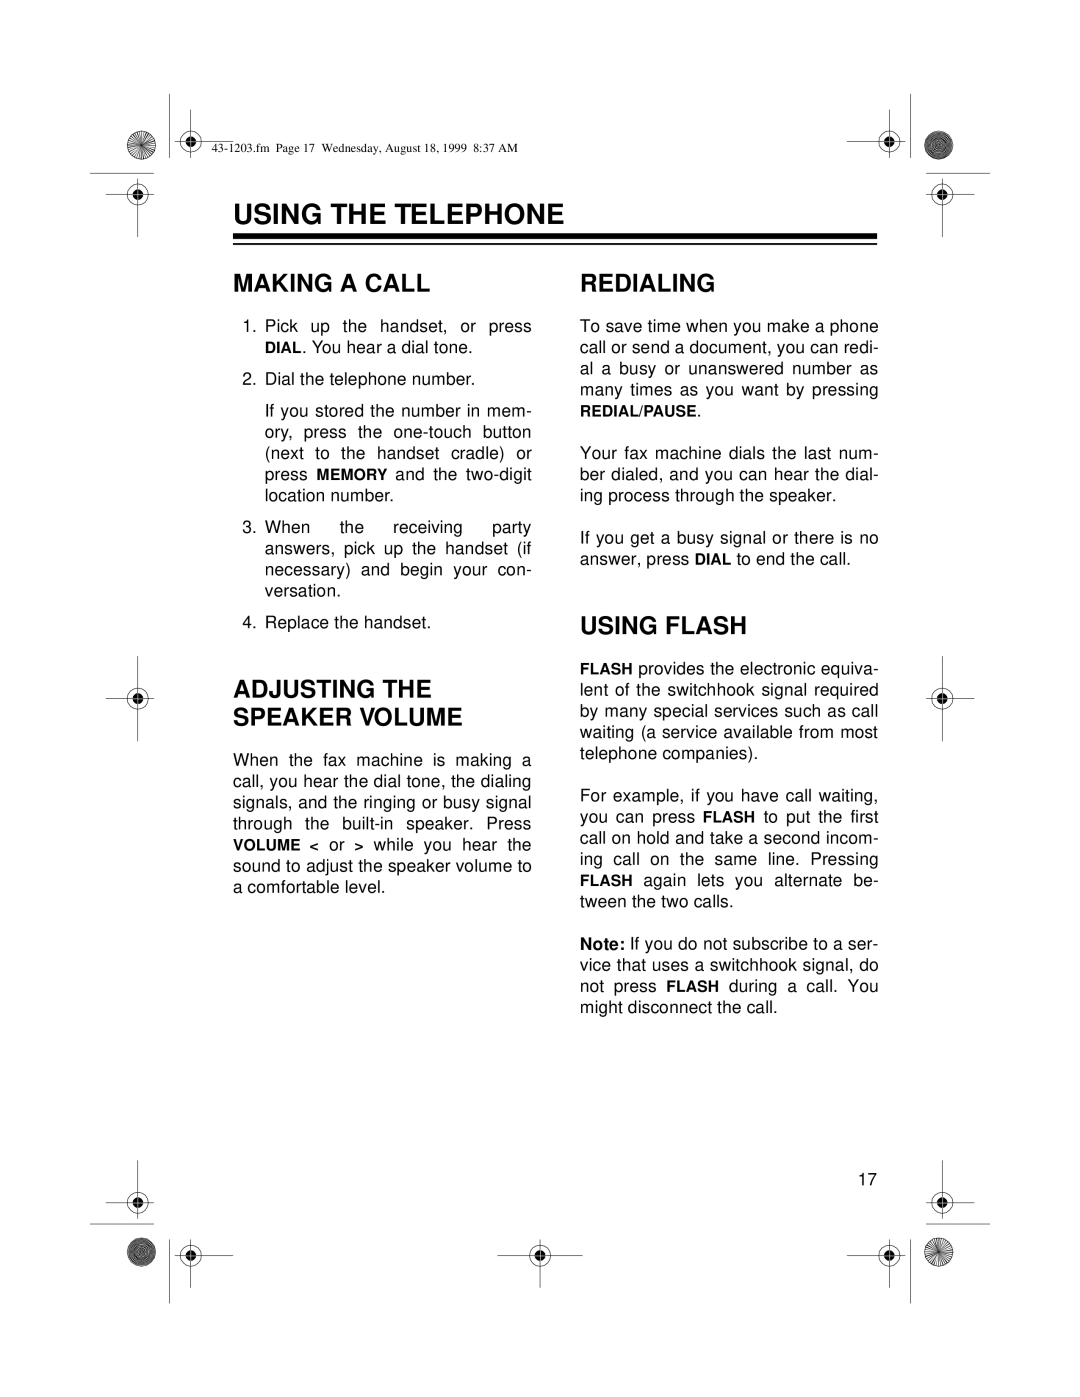 Radio Shack TFX-1031 owner manual Using The Telephone, Making A Call, Redialing, Using Flash, Adjusting The Speaker Volume 